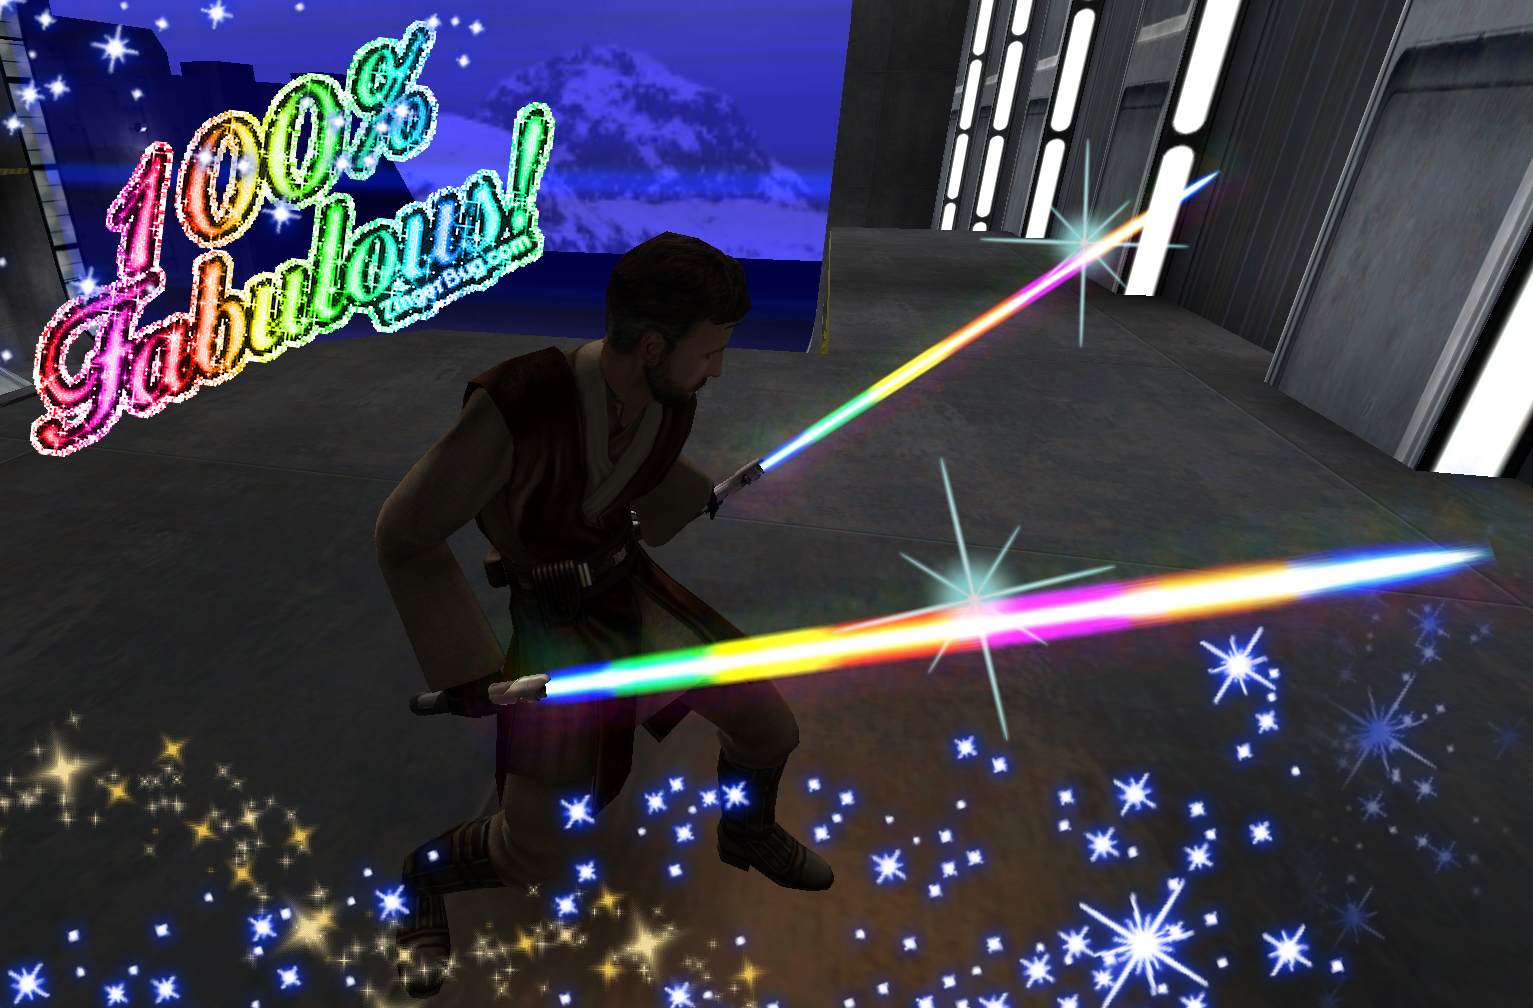 More information about "Rainbow Prism Lightsaber"